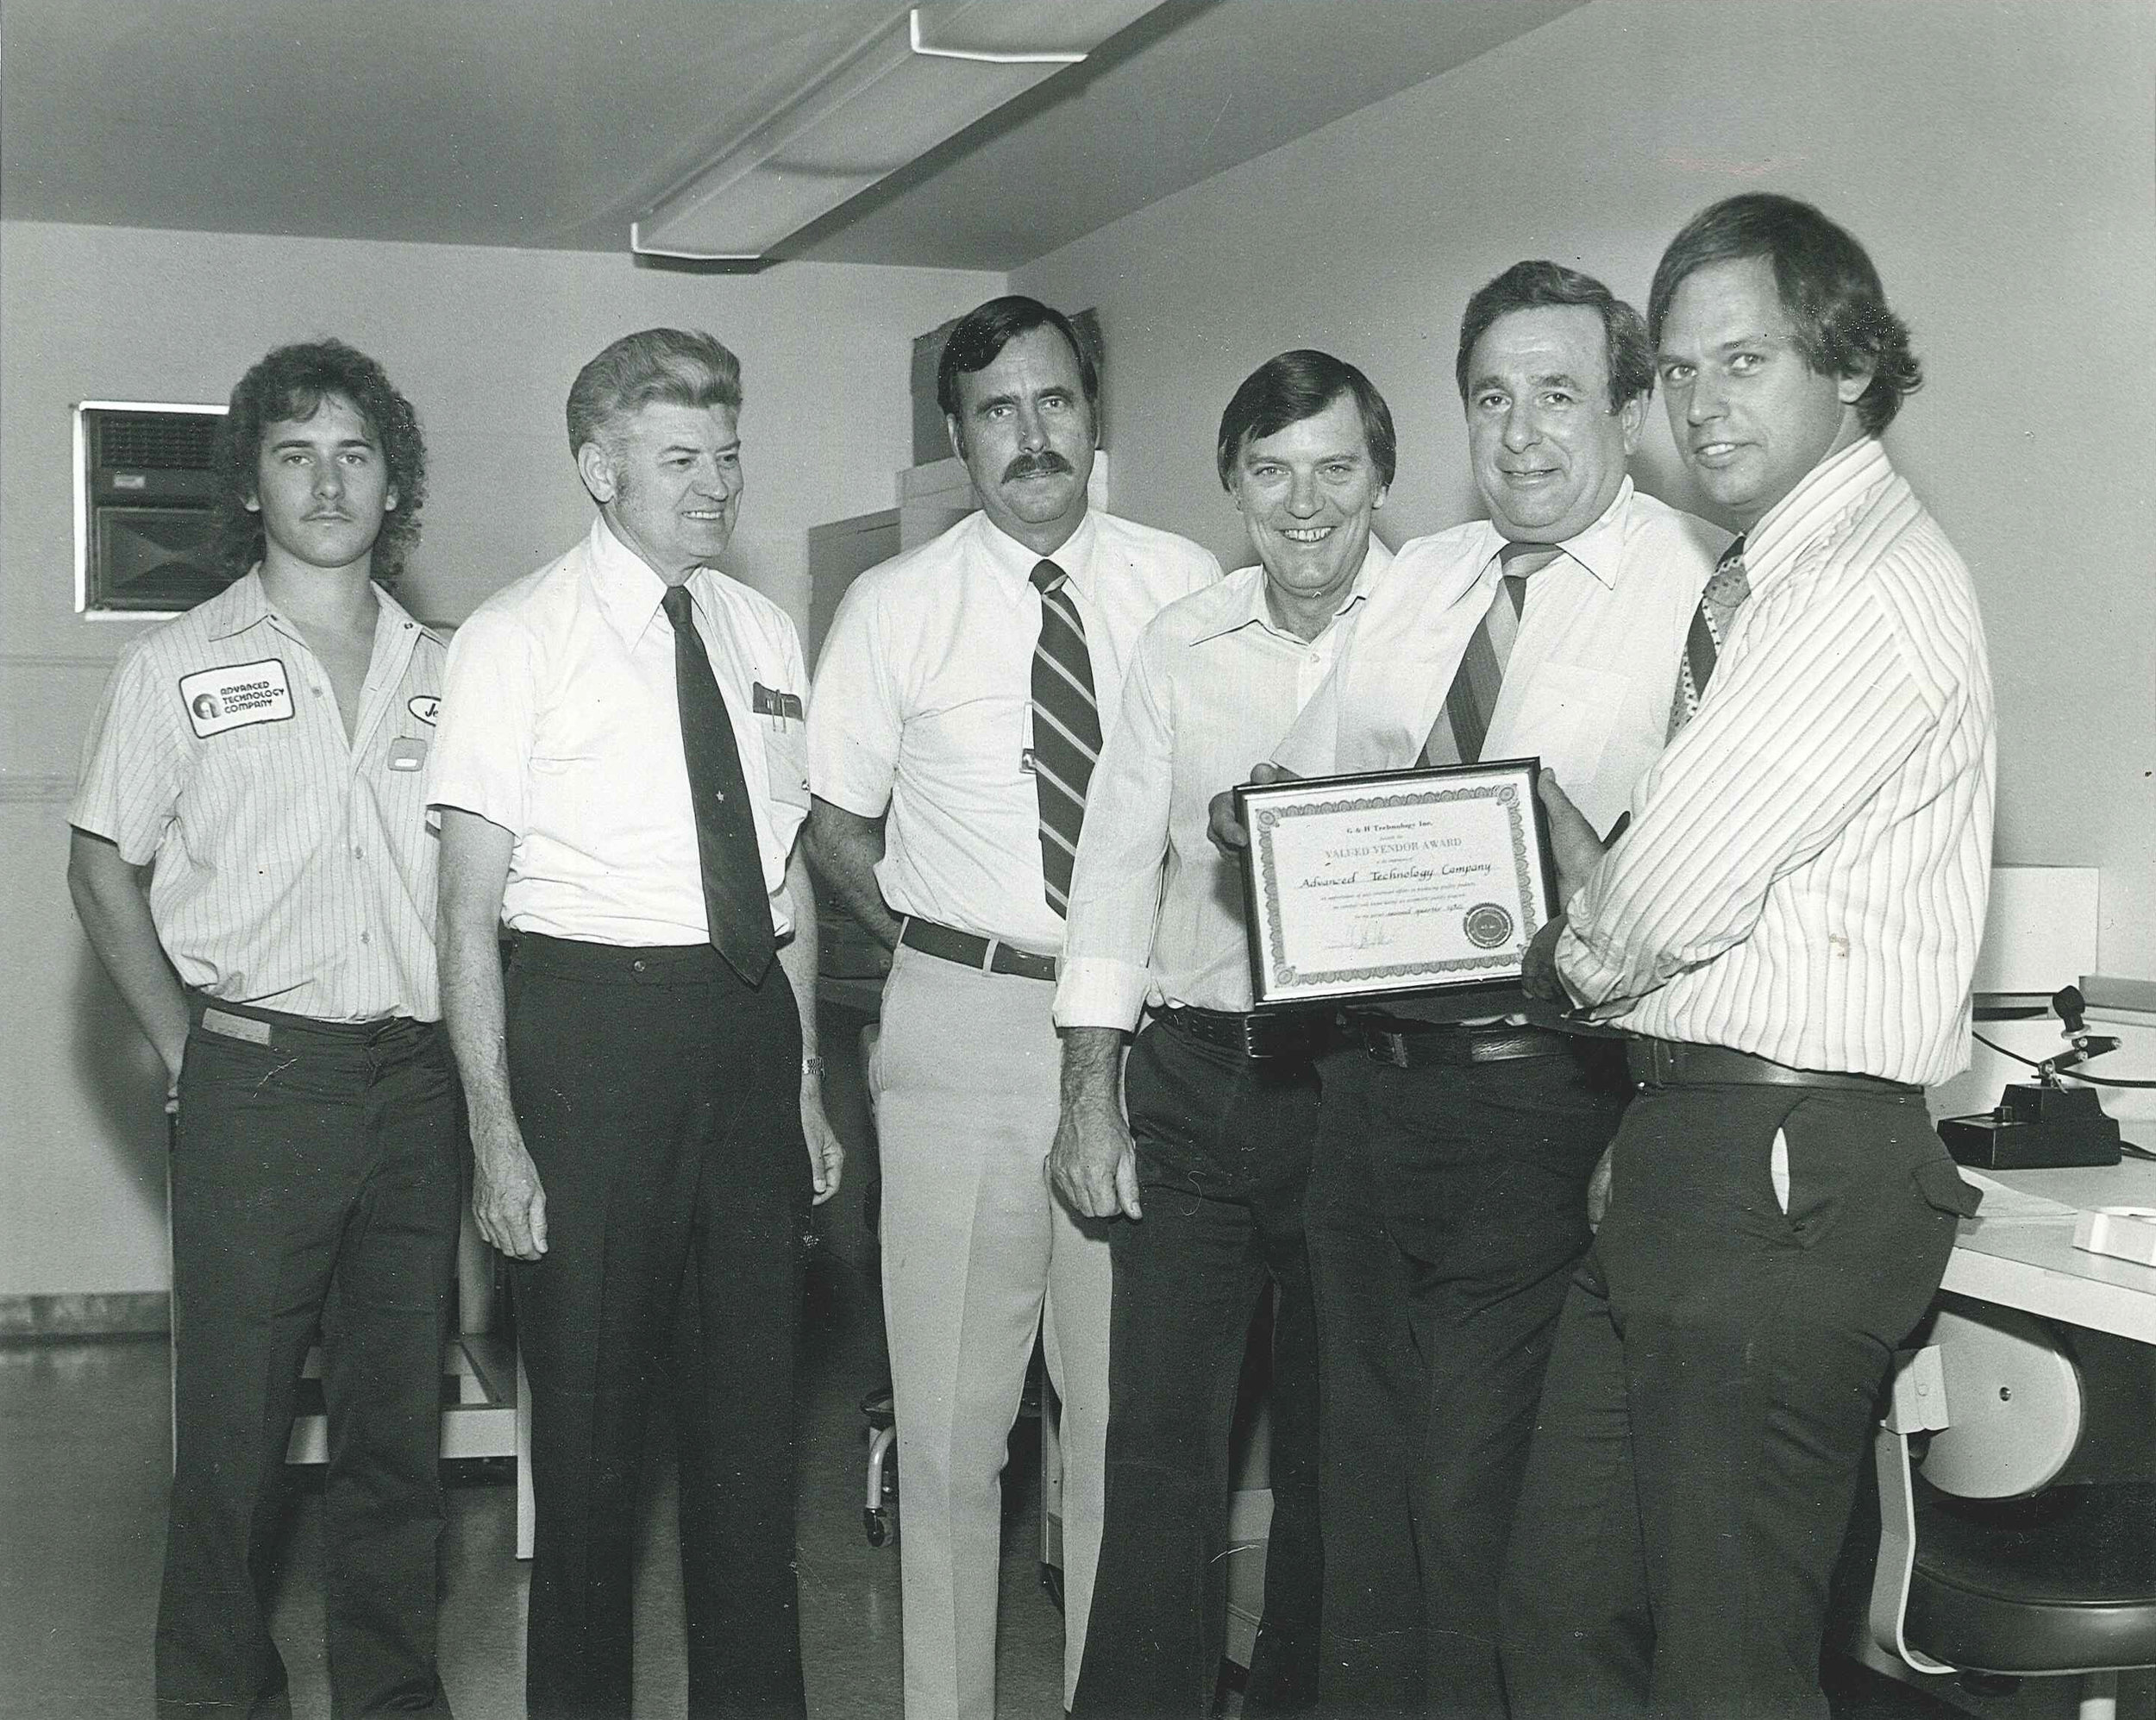  Pictured left to right: Jeff Lesovsky, ???, ???, founder Jay Frey, founder Bob DeSilvestri, and ???. circa 1980 